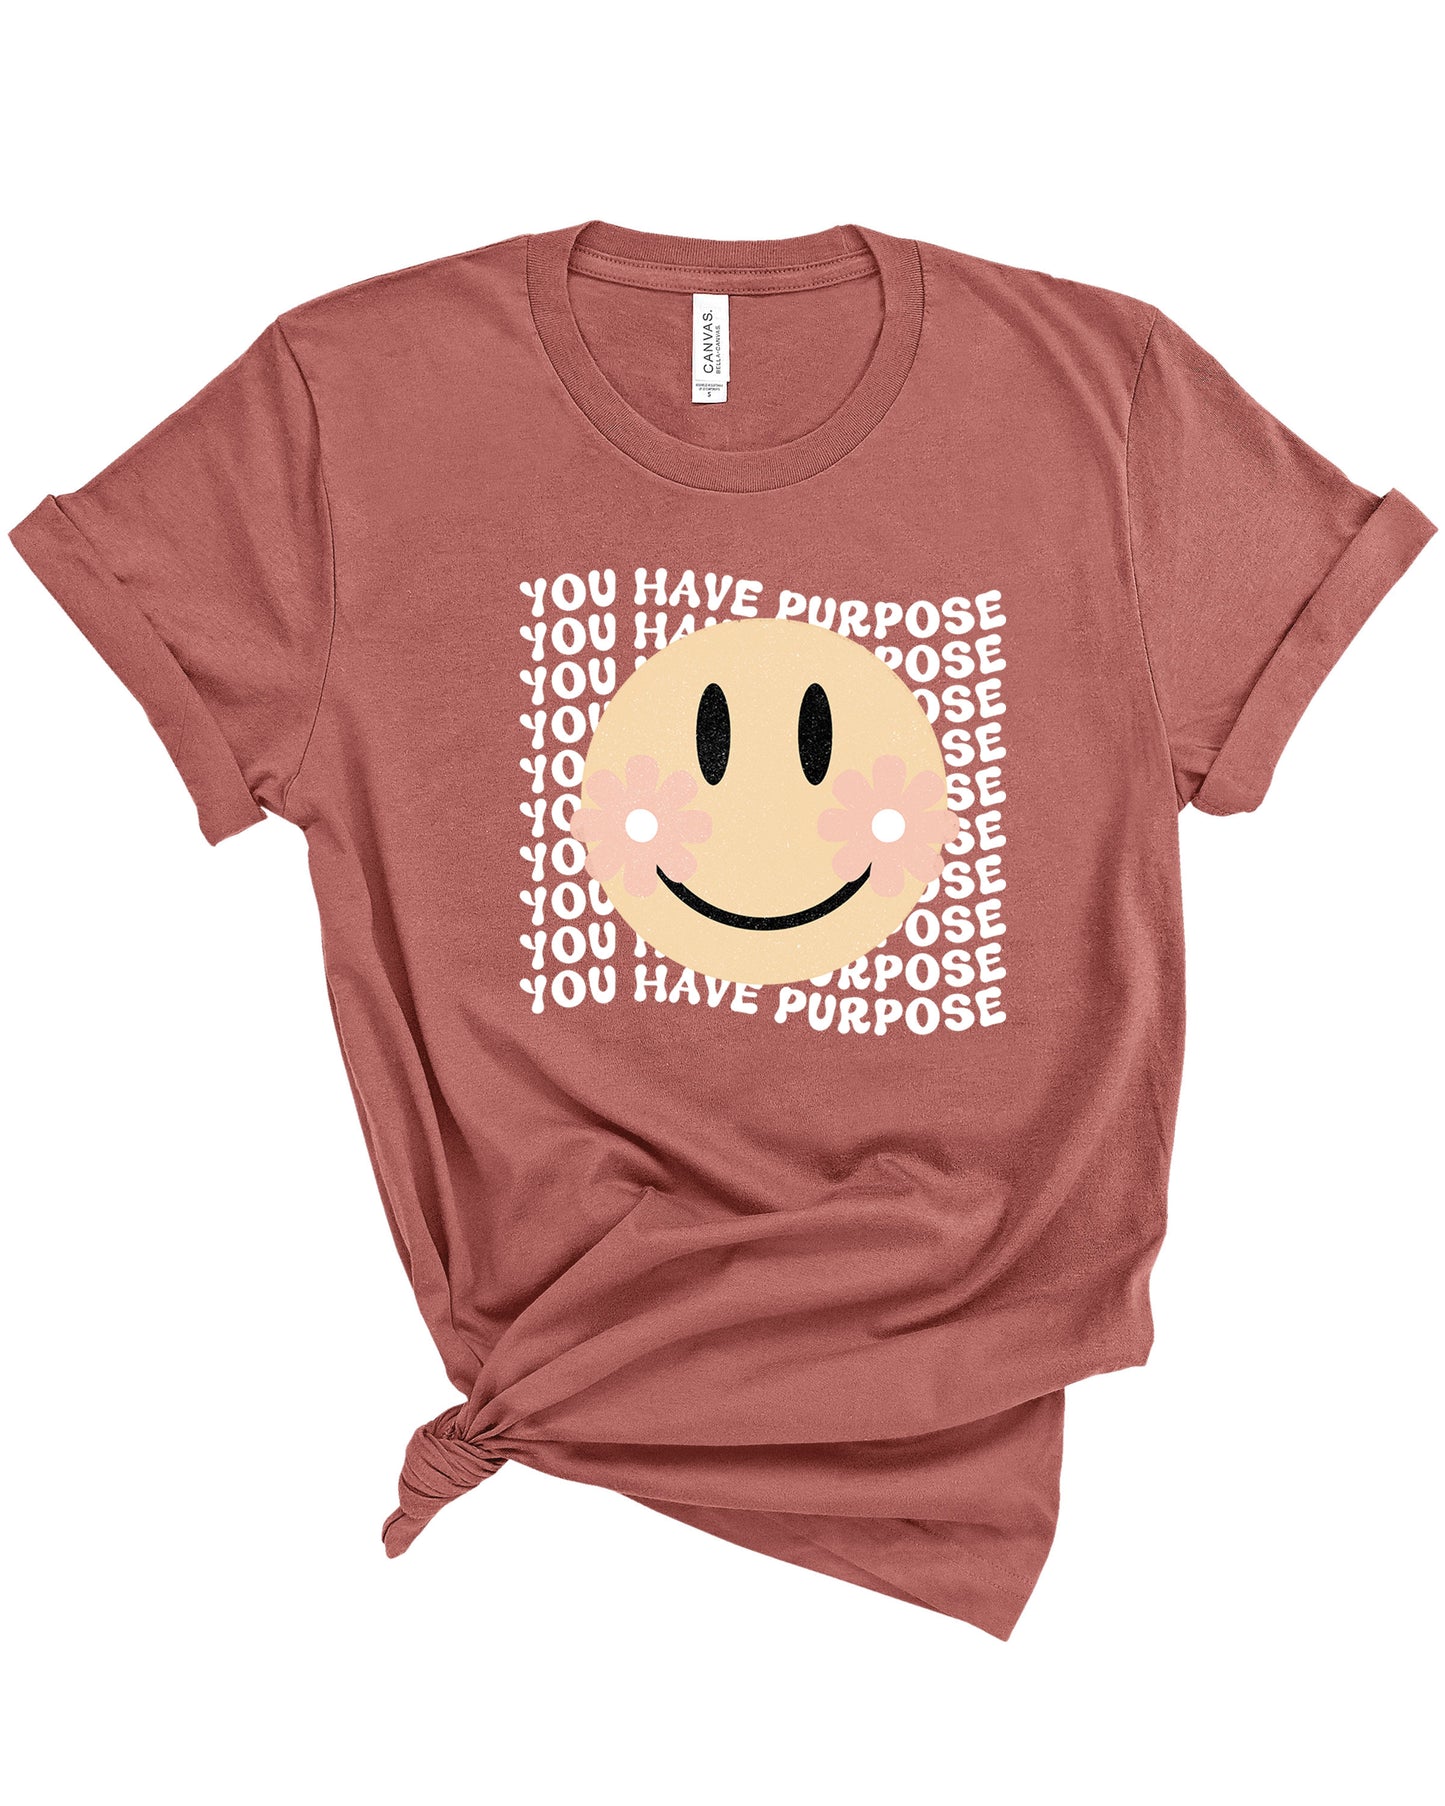 You Have Purpose | Adult Tee-Sister Shirts-Sister Shirts, Cute & Custom Tees for Mama & Littles in Trussville, Alabama.